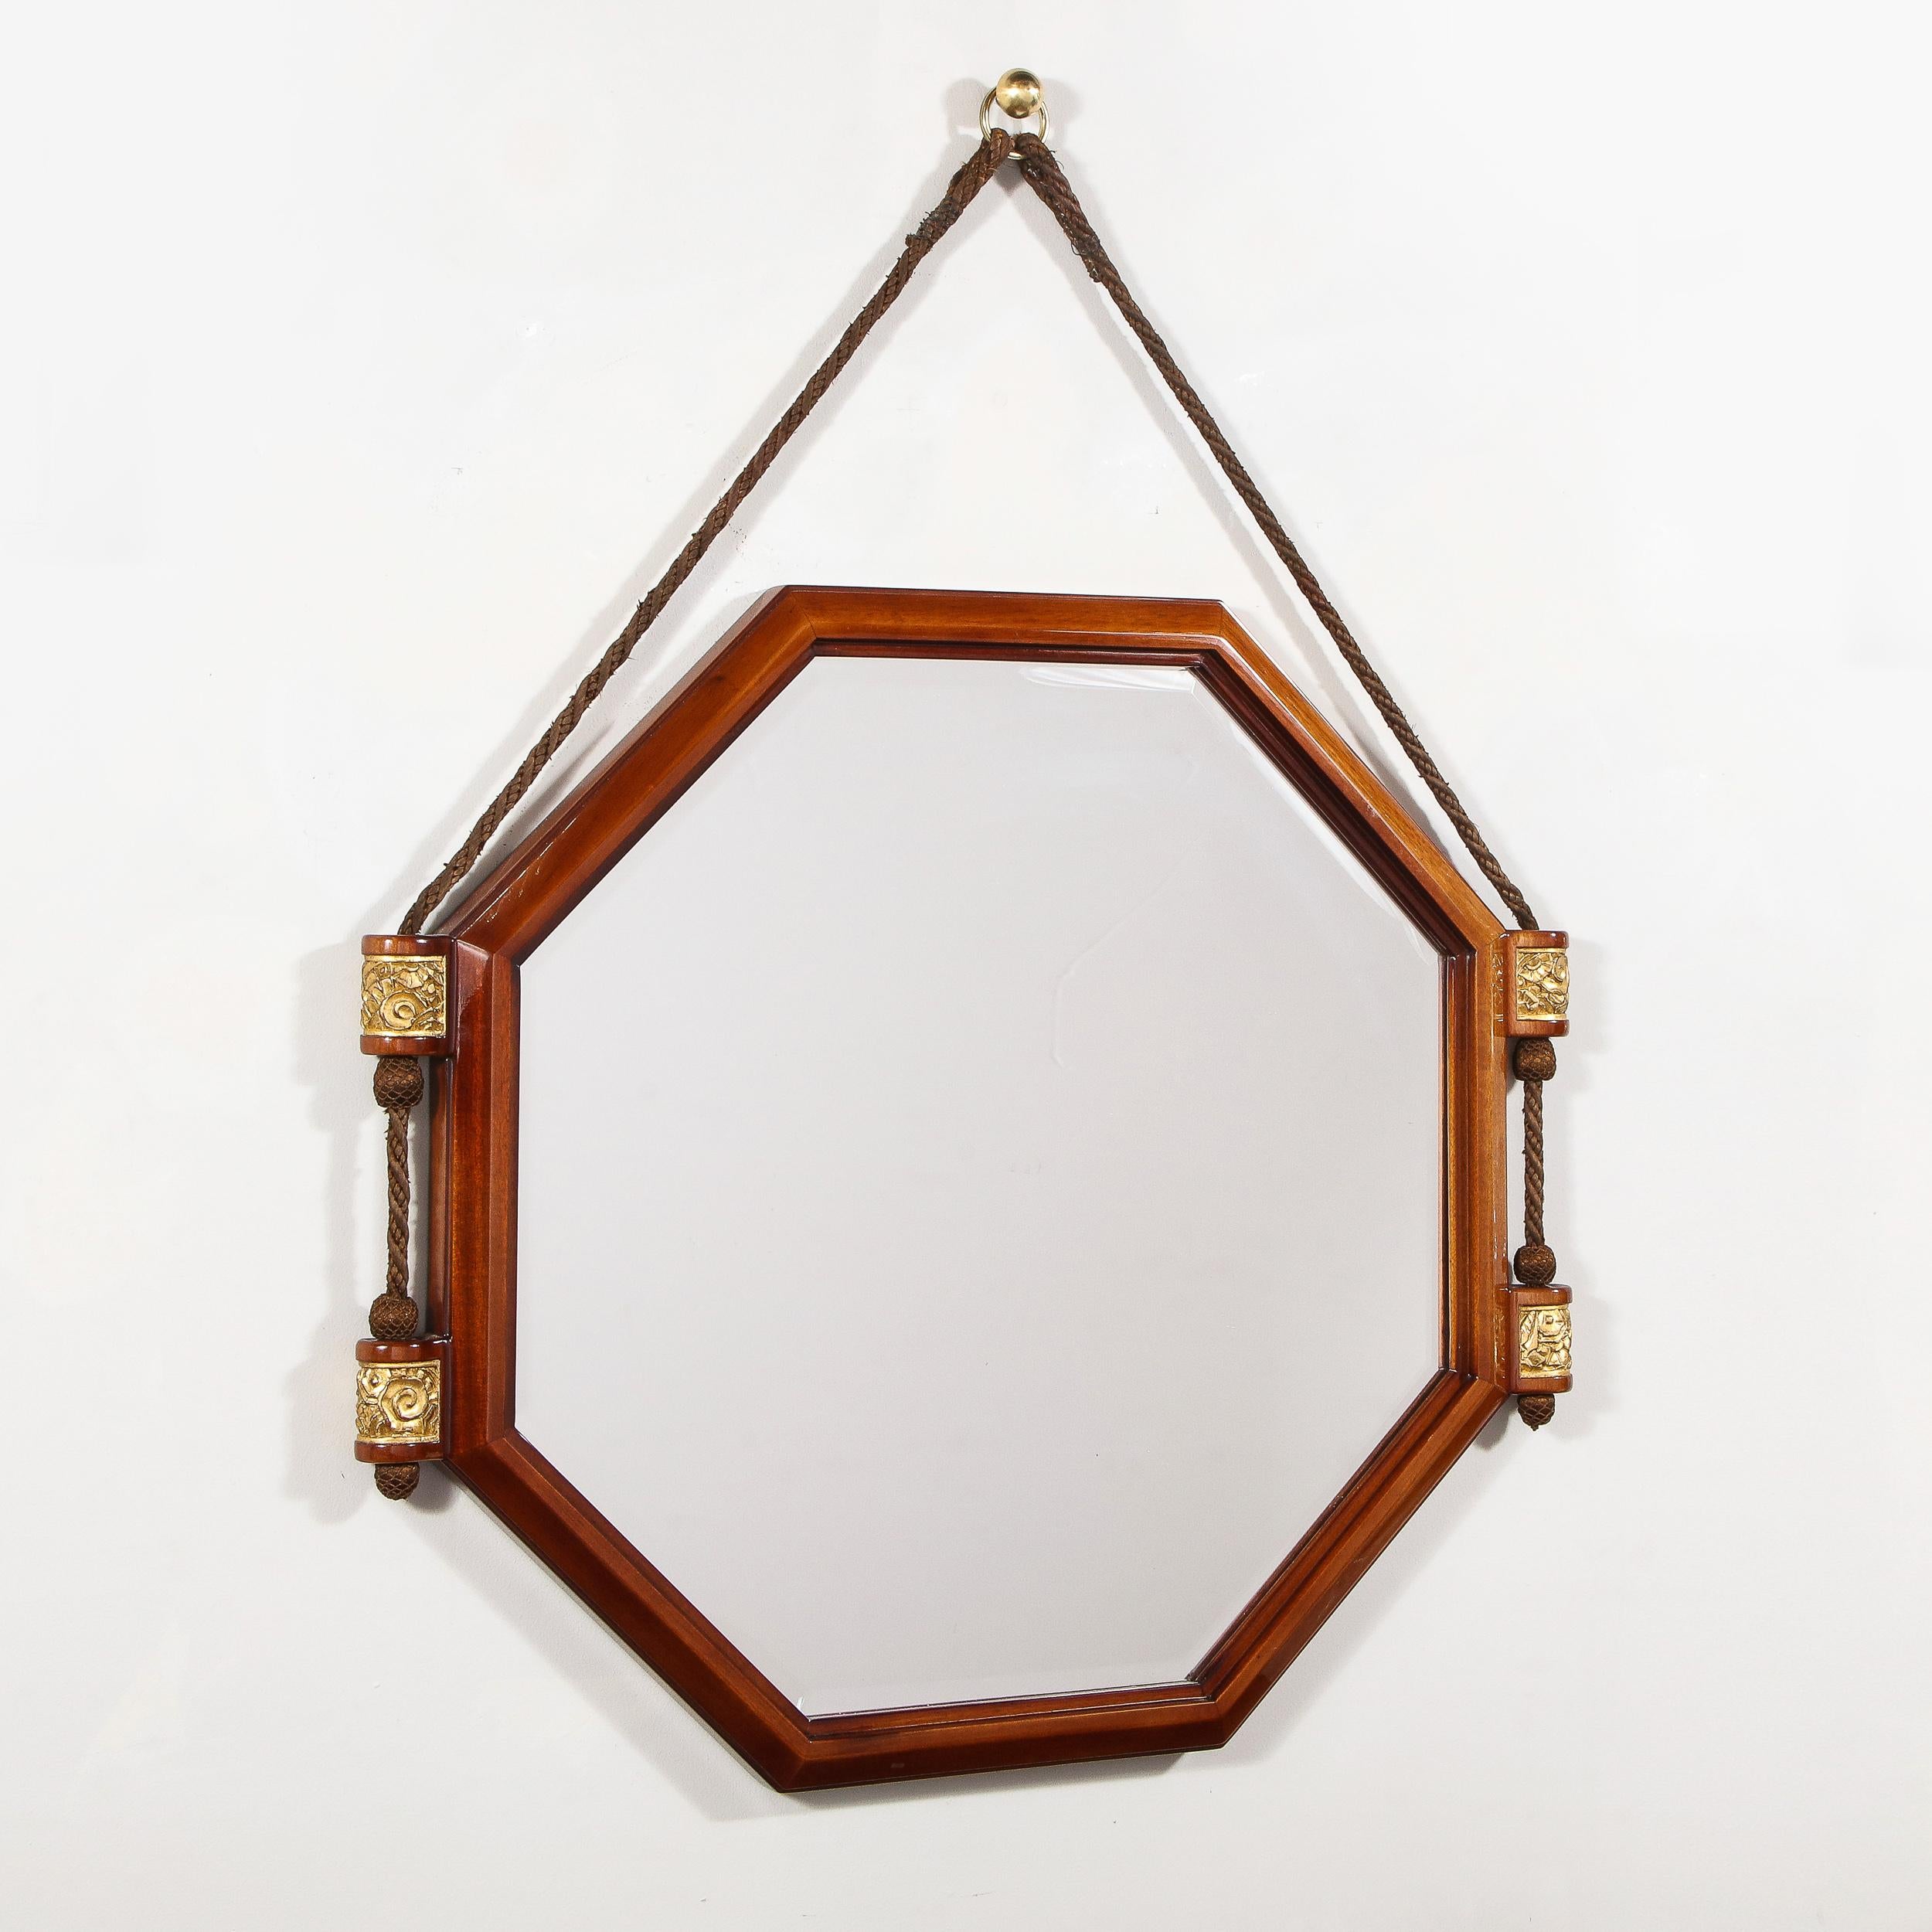 This stunning Art Deco mirror mirror was realized in France circa 1930. It features an octagonal form in walnut wiht a plain beveled mirror in the center. The mirror hangs from a java hued cotton cord that attaches to two cylindrical walnut supports